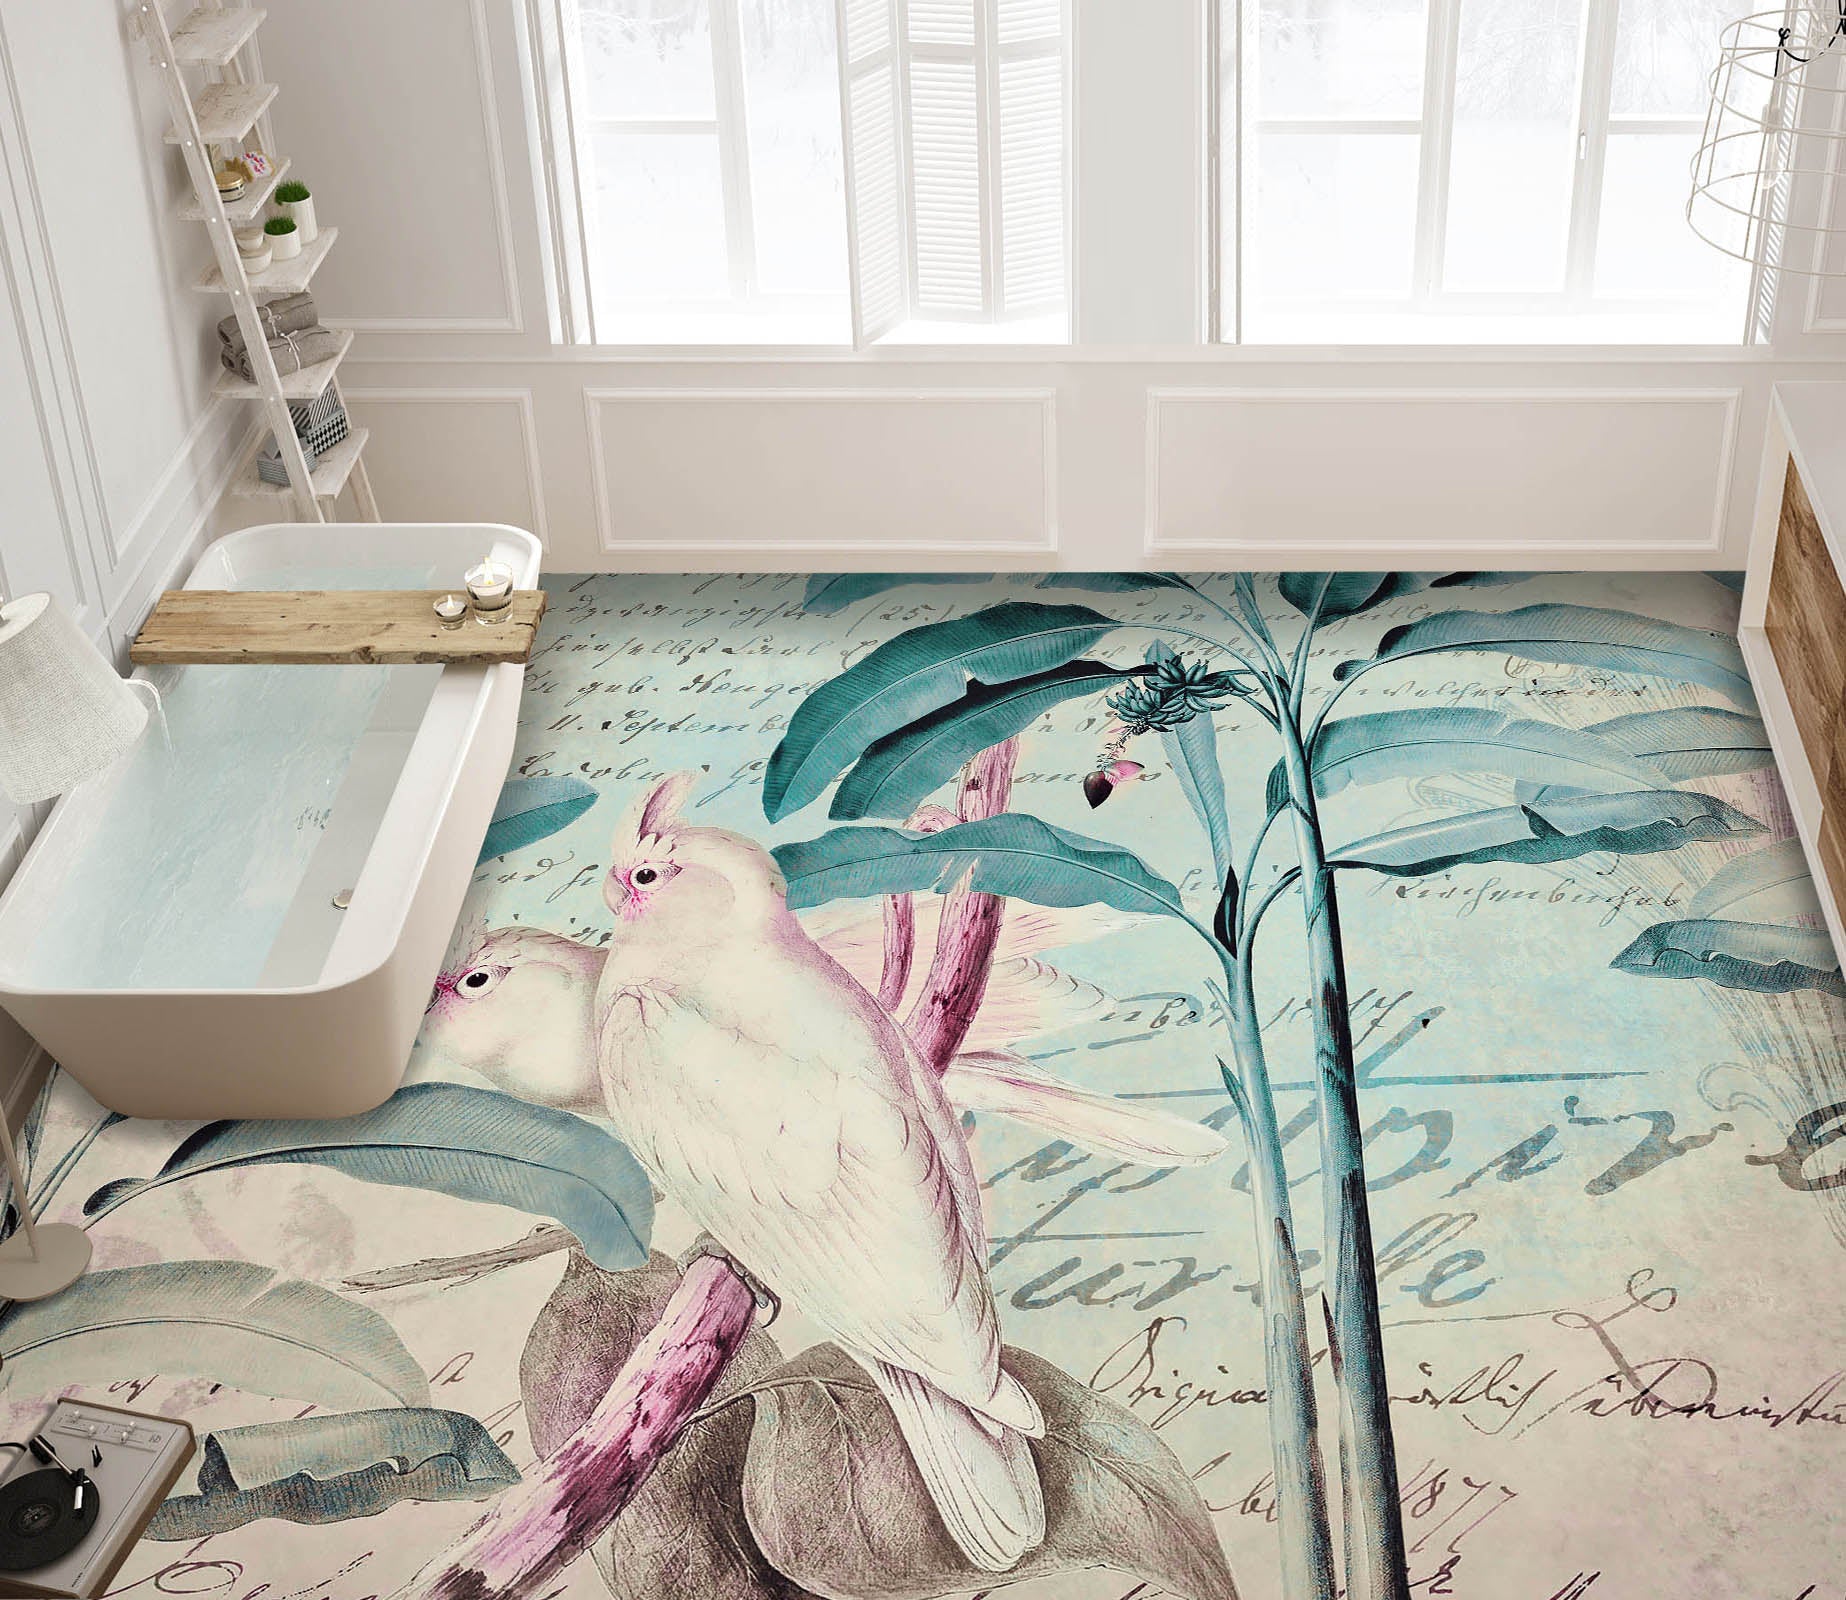 3D Leaves White Parrot 104162 Andrea Haase Floor Mural  Wallpaper Murals Self-Adhesive Removable Print Epoxy